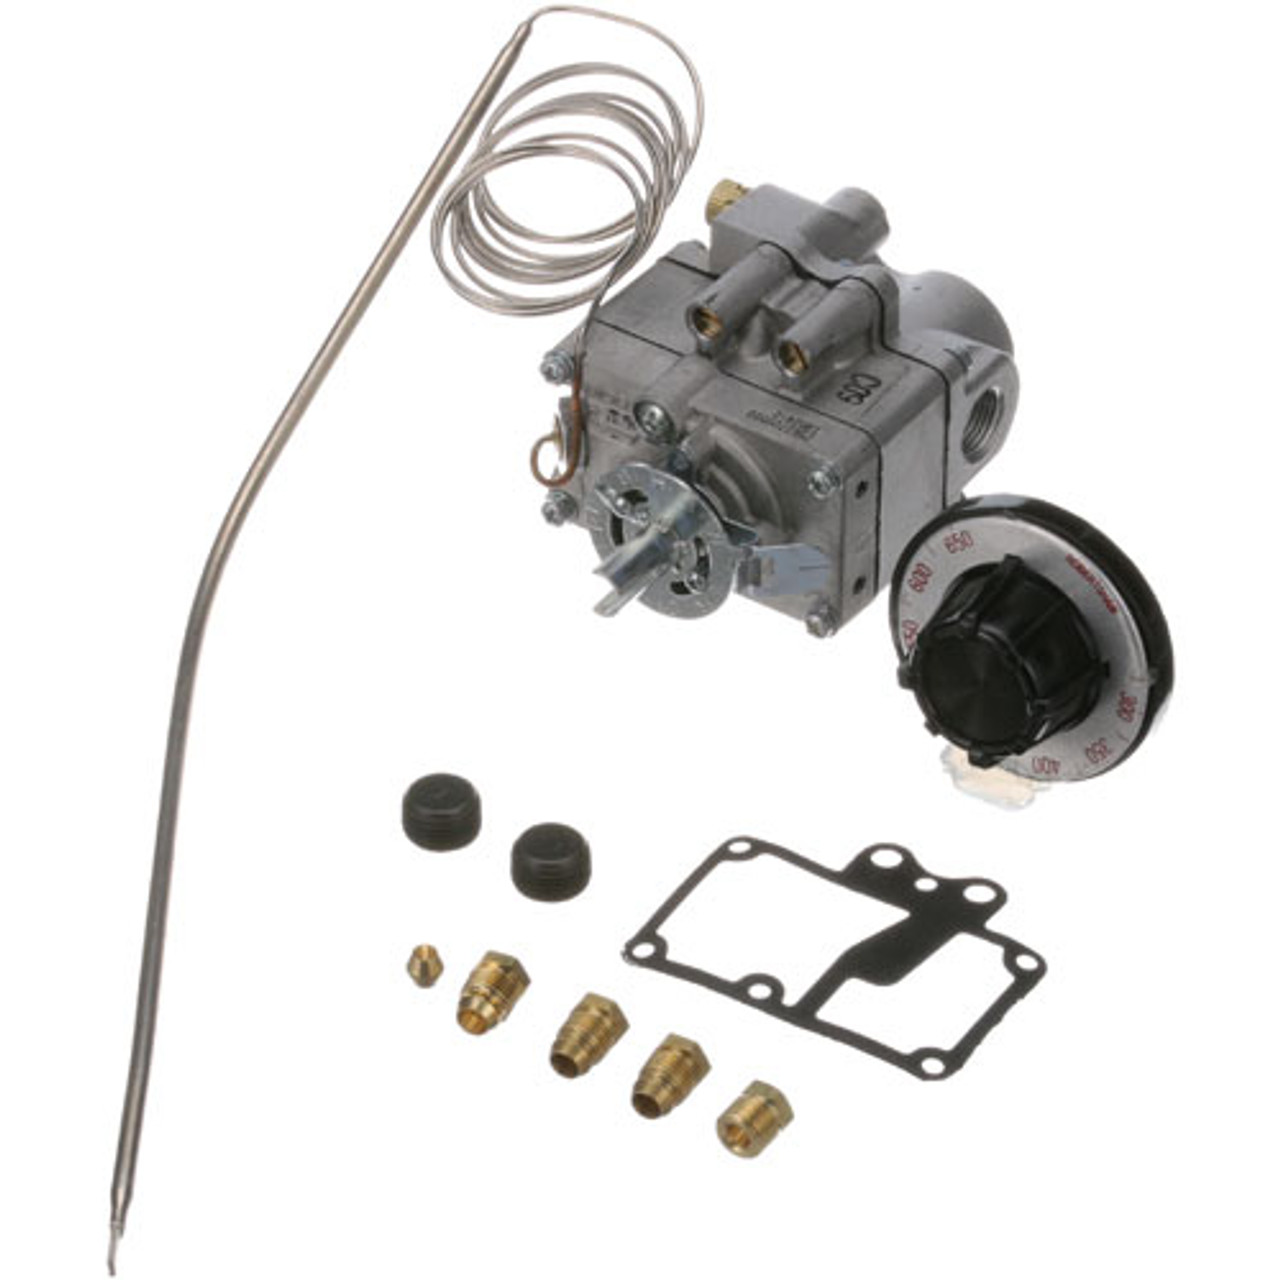 Thermostat Kit Fdth-1,3/16 X 14-3/4, 54 - Replacement Part For Montague 3501-7